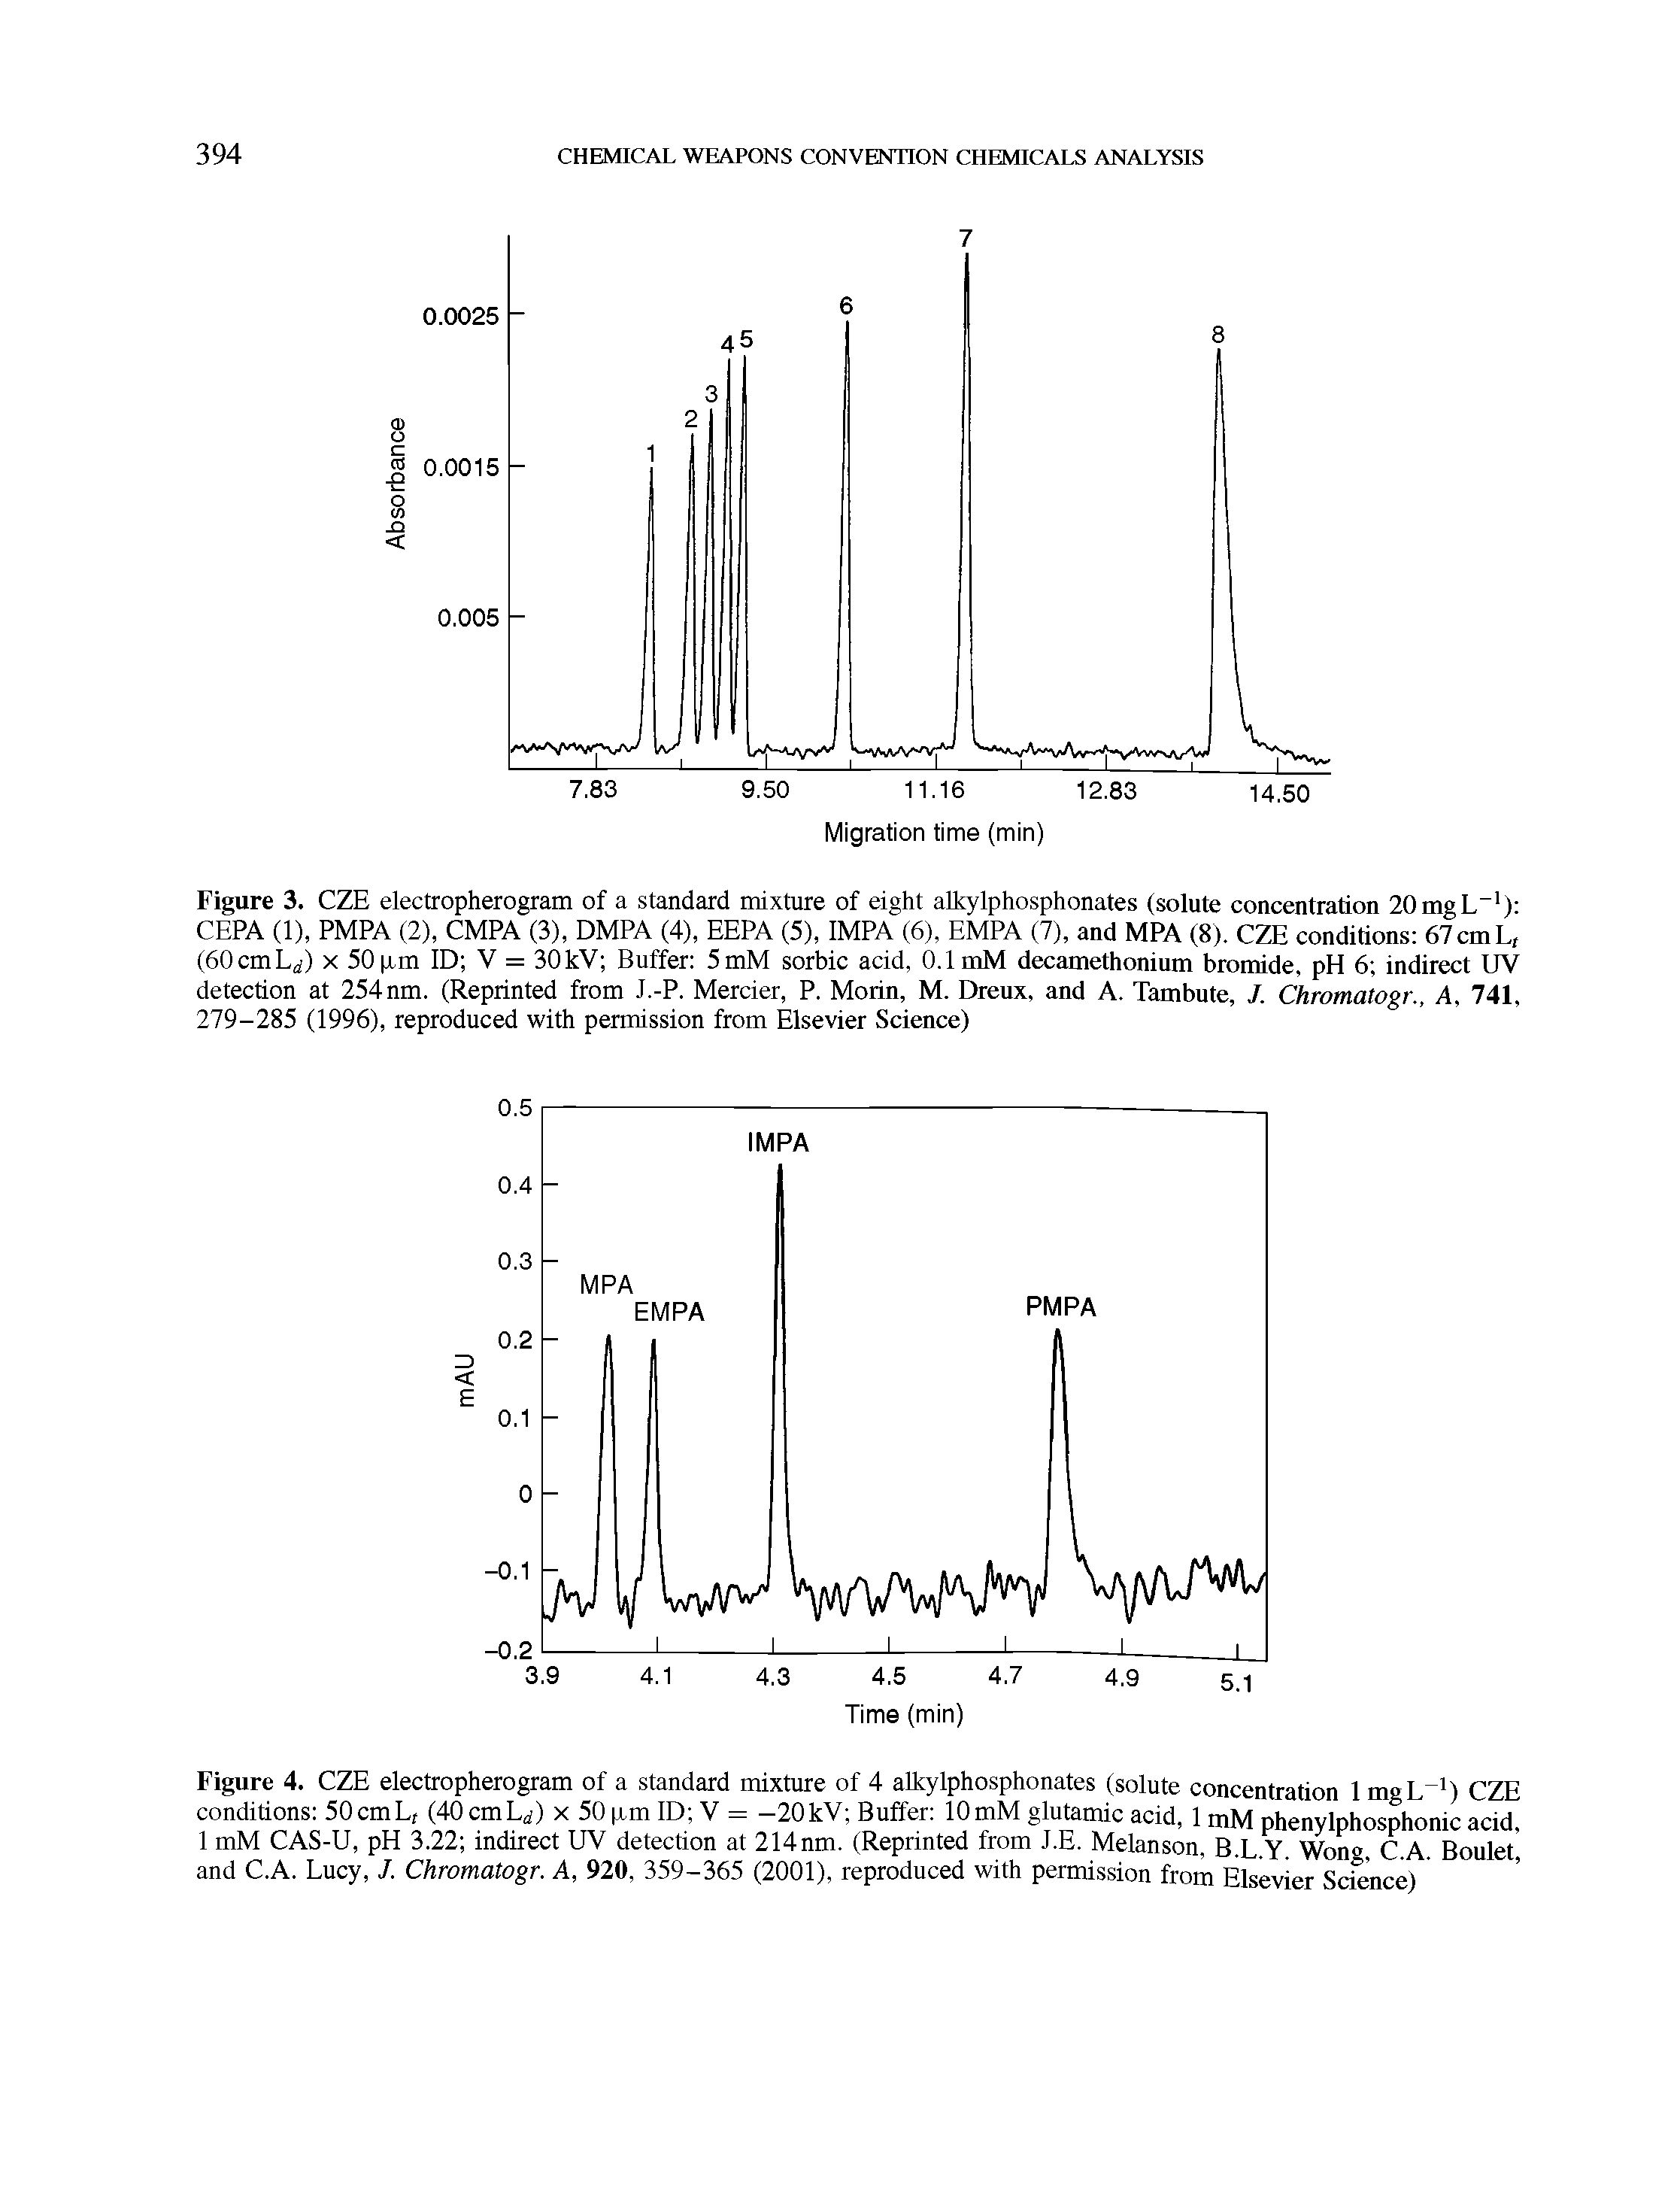 Figure 3. CZE electropherogram of a standard mixture of eight alkylphosphonates (solute concentration 20mgL ) CEPA (1), PMPA (2), CMPA (3), DMPA (4), EEPA (5), IMPA (6), EMPA (7), and MPA (8). CZE conditions 67cmL, (COcmLj x 50 pm ID V = 30 kV Buffer 5mM sorbic acid, 0.1 mM decamethonium bromide, pH 6 indirect UV detection at 254nm. (Reprinted from J.-P. Mercier, P. Morin, M. Dreux, and A. Tambute, J. Chromatogr., A, 741, 279-285 (1996), reproduced with permission from Elsevier Science)...